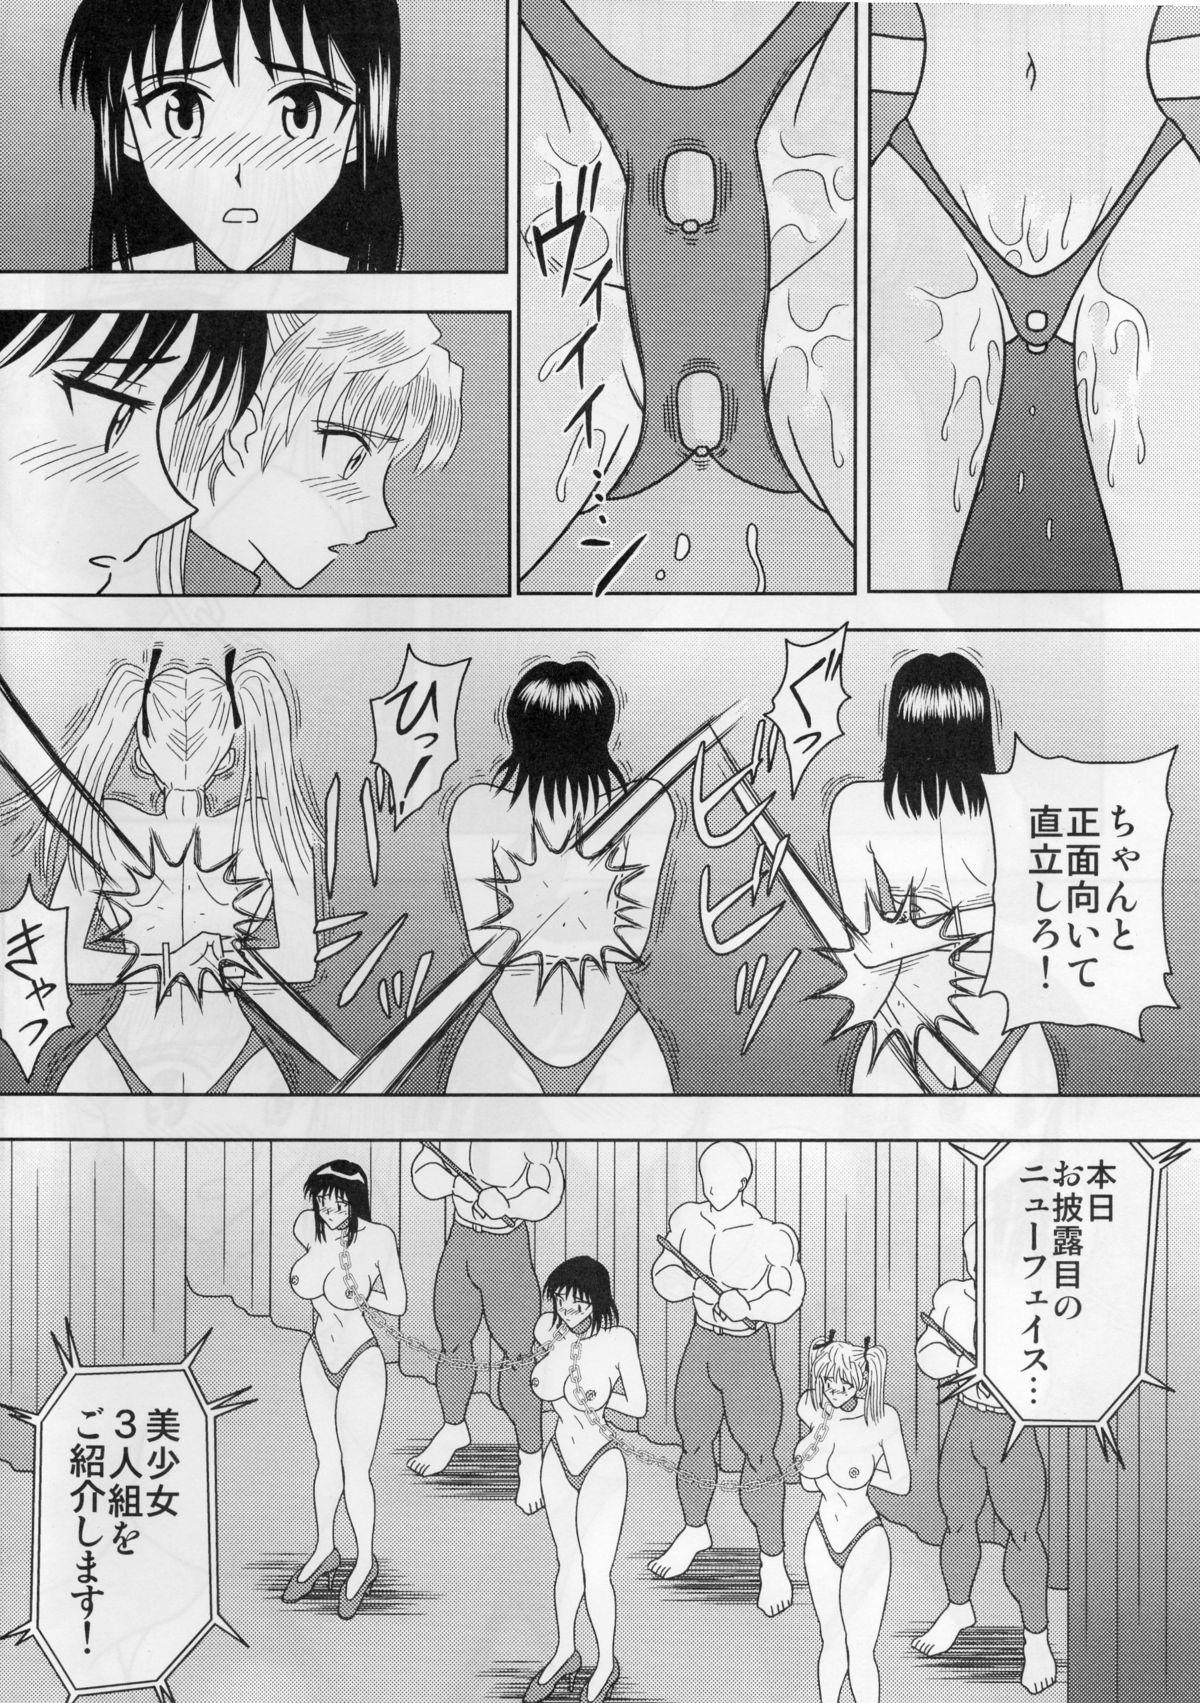 Face Sitting Slave Rumble 4 - School rumble Morena - Page 5